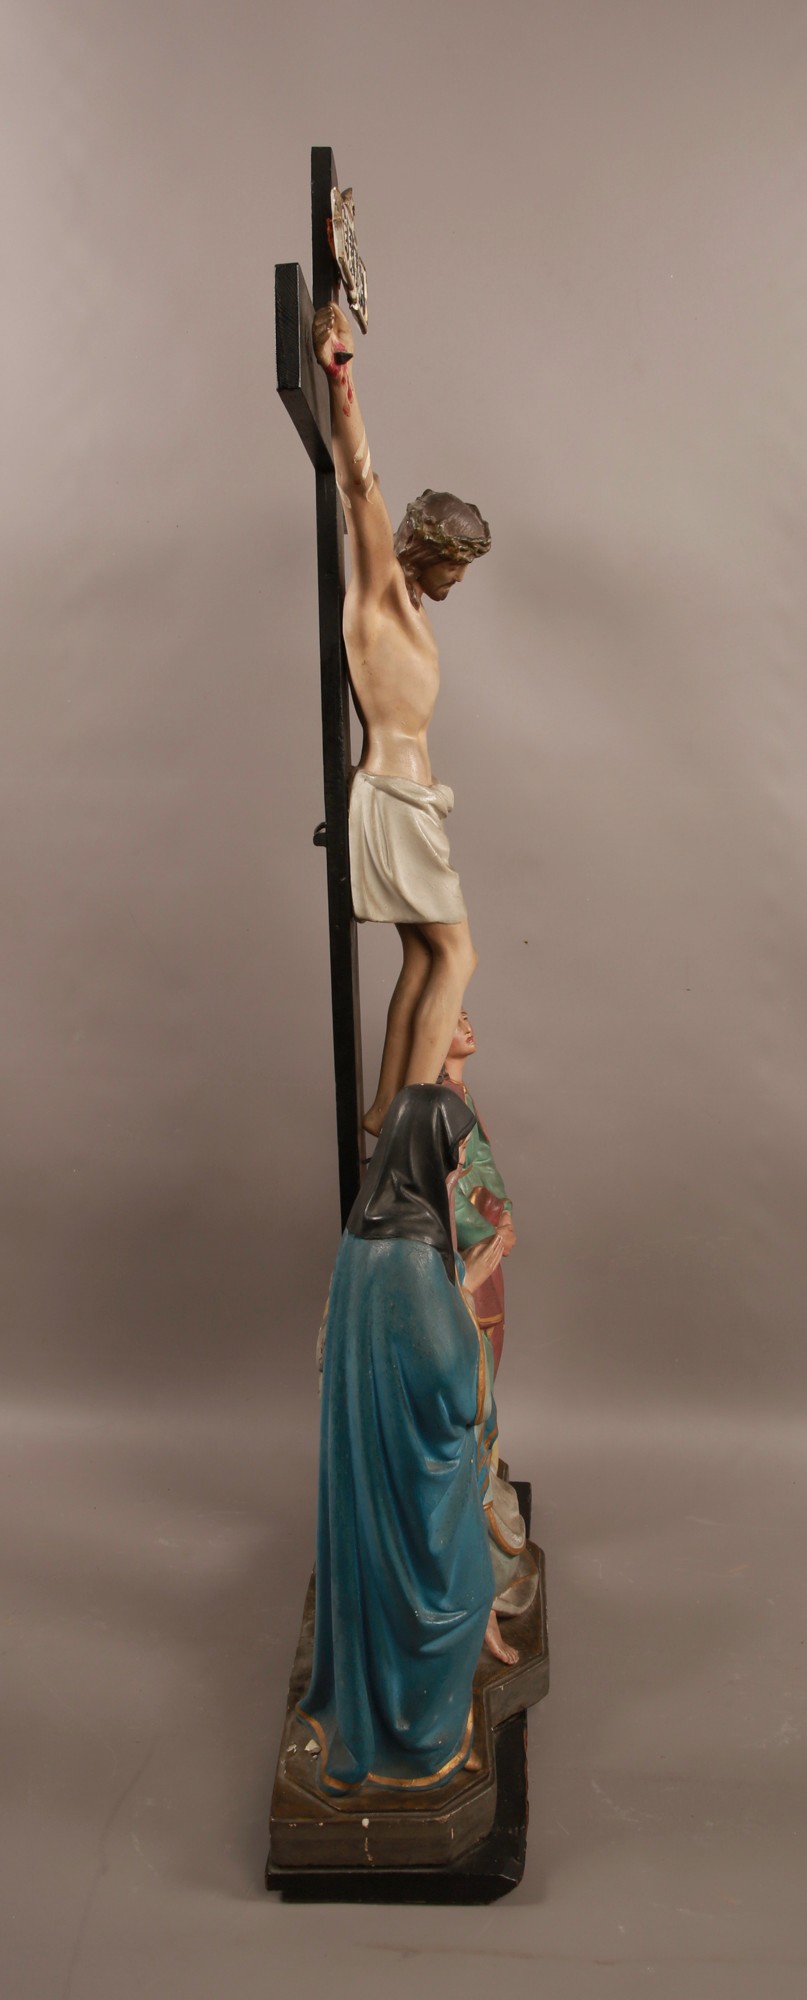 A Large Religious Statue of Jesus on the Cross Early 1900s 115cm Tall #93 - Image 5 of 6